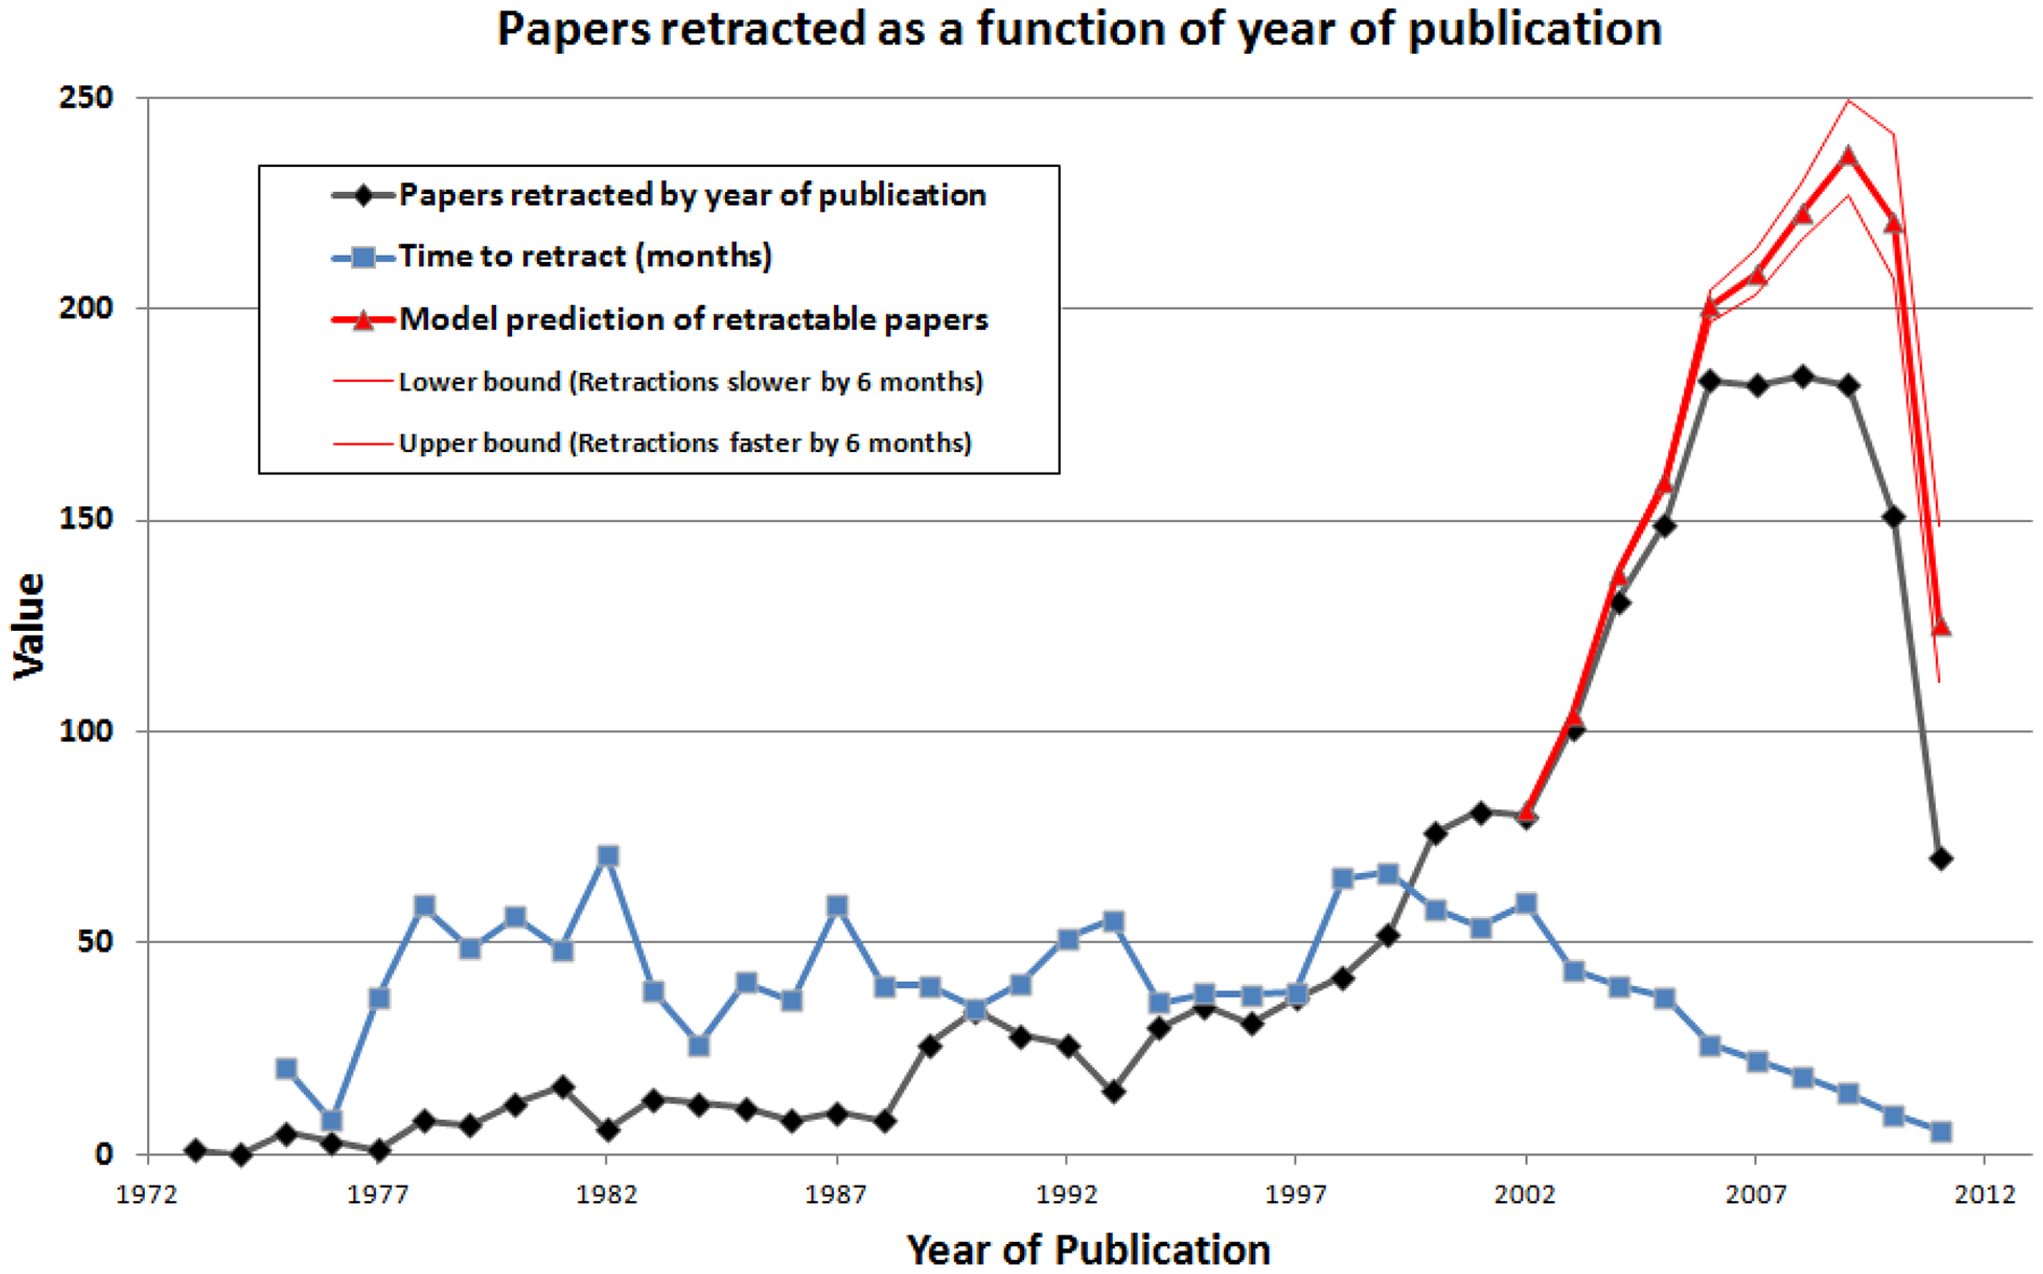 CrossFit Why Has the Number of Scientific Retractions Increased?